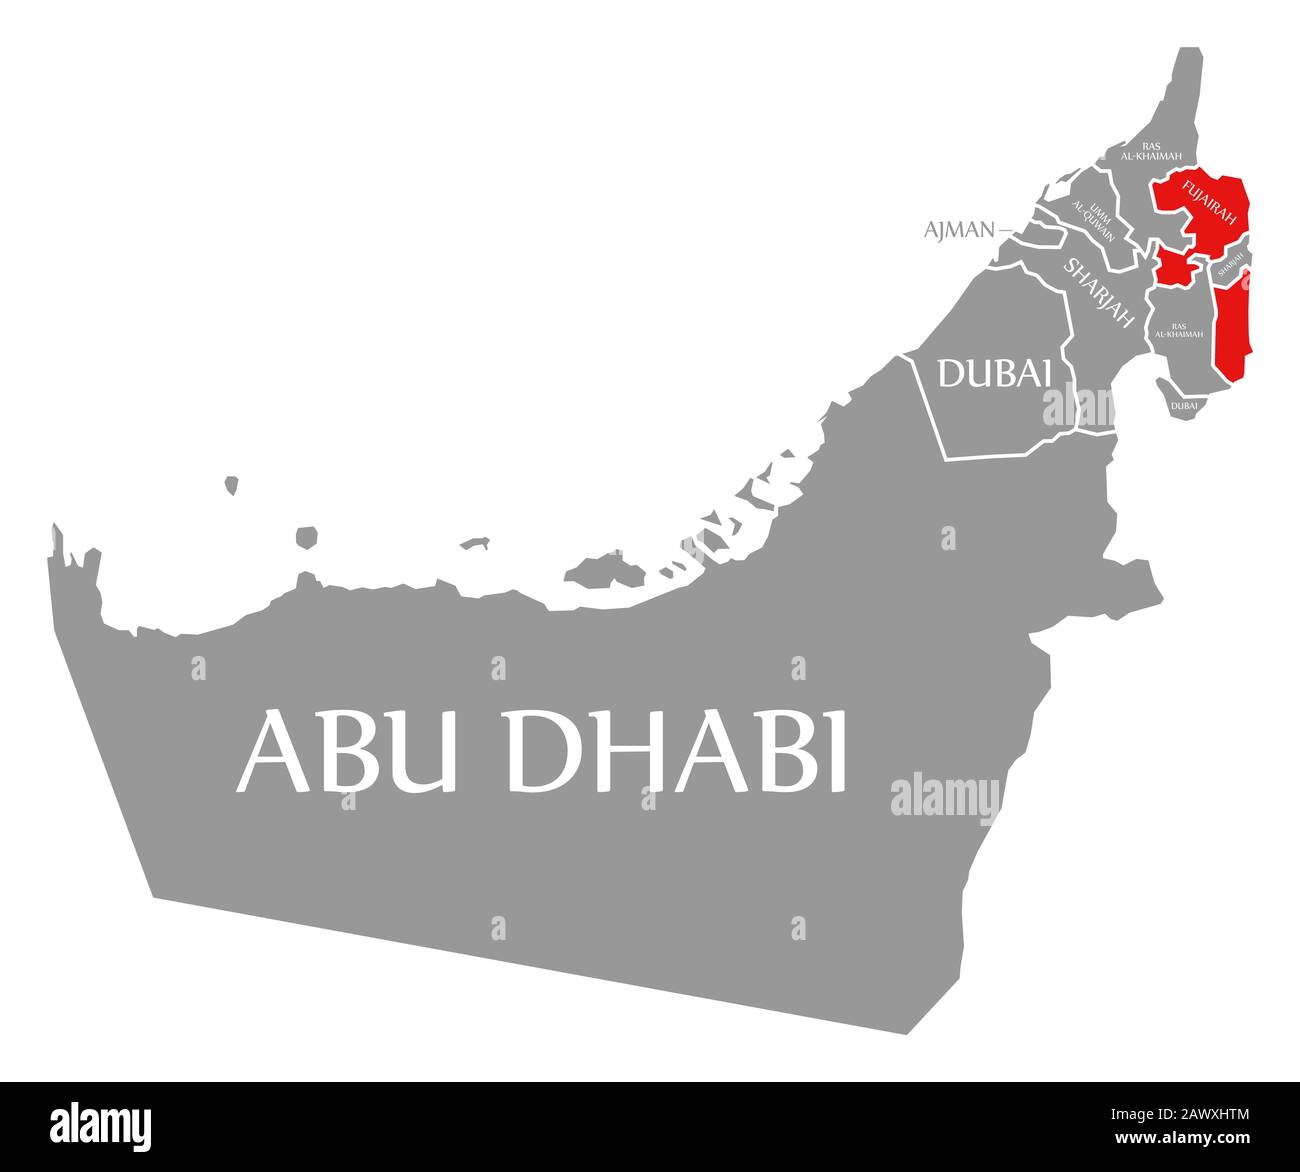 Fujairah red highlighted in map of United Arab Emirates Stock Photo - Alamy